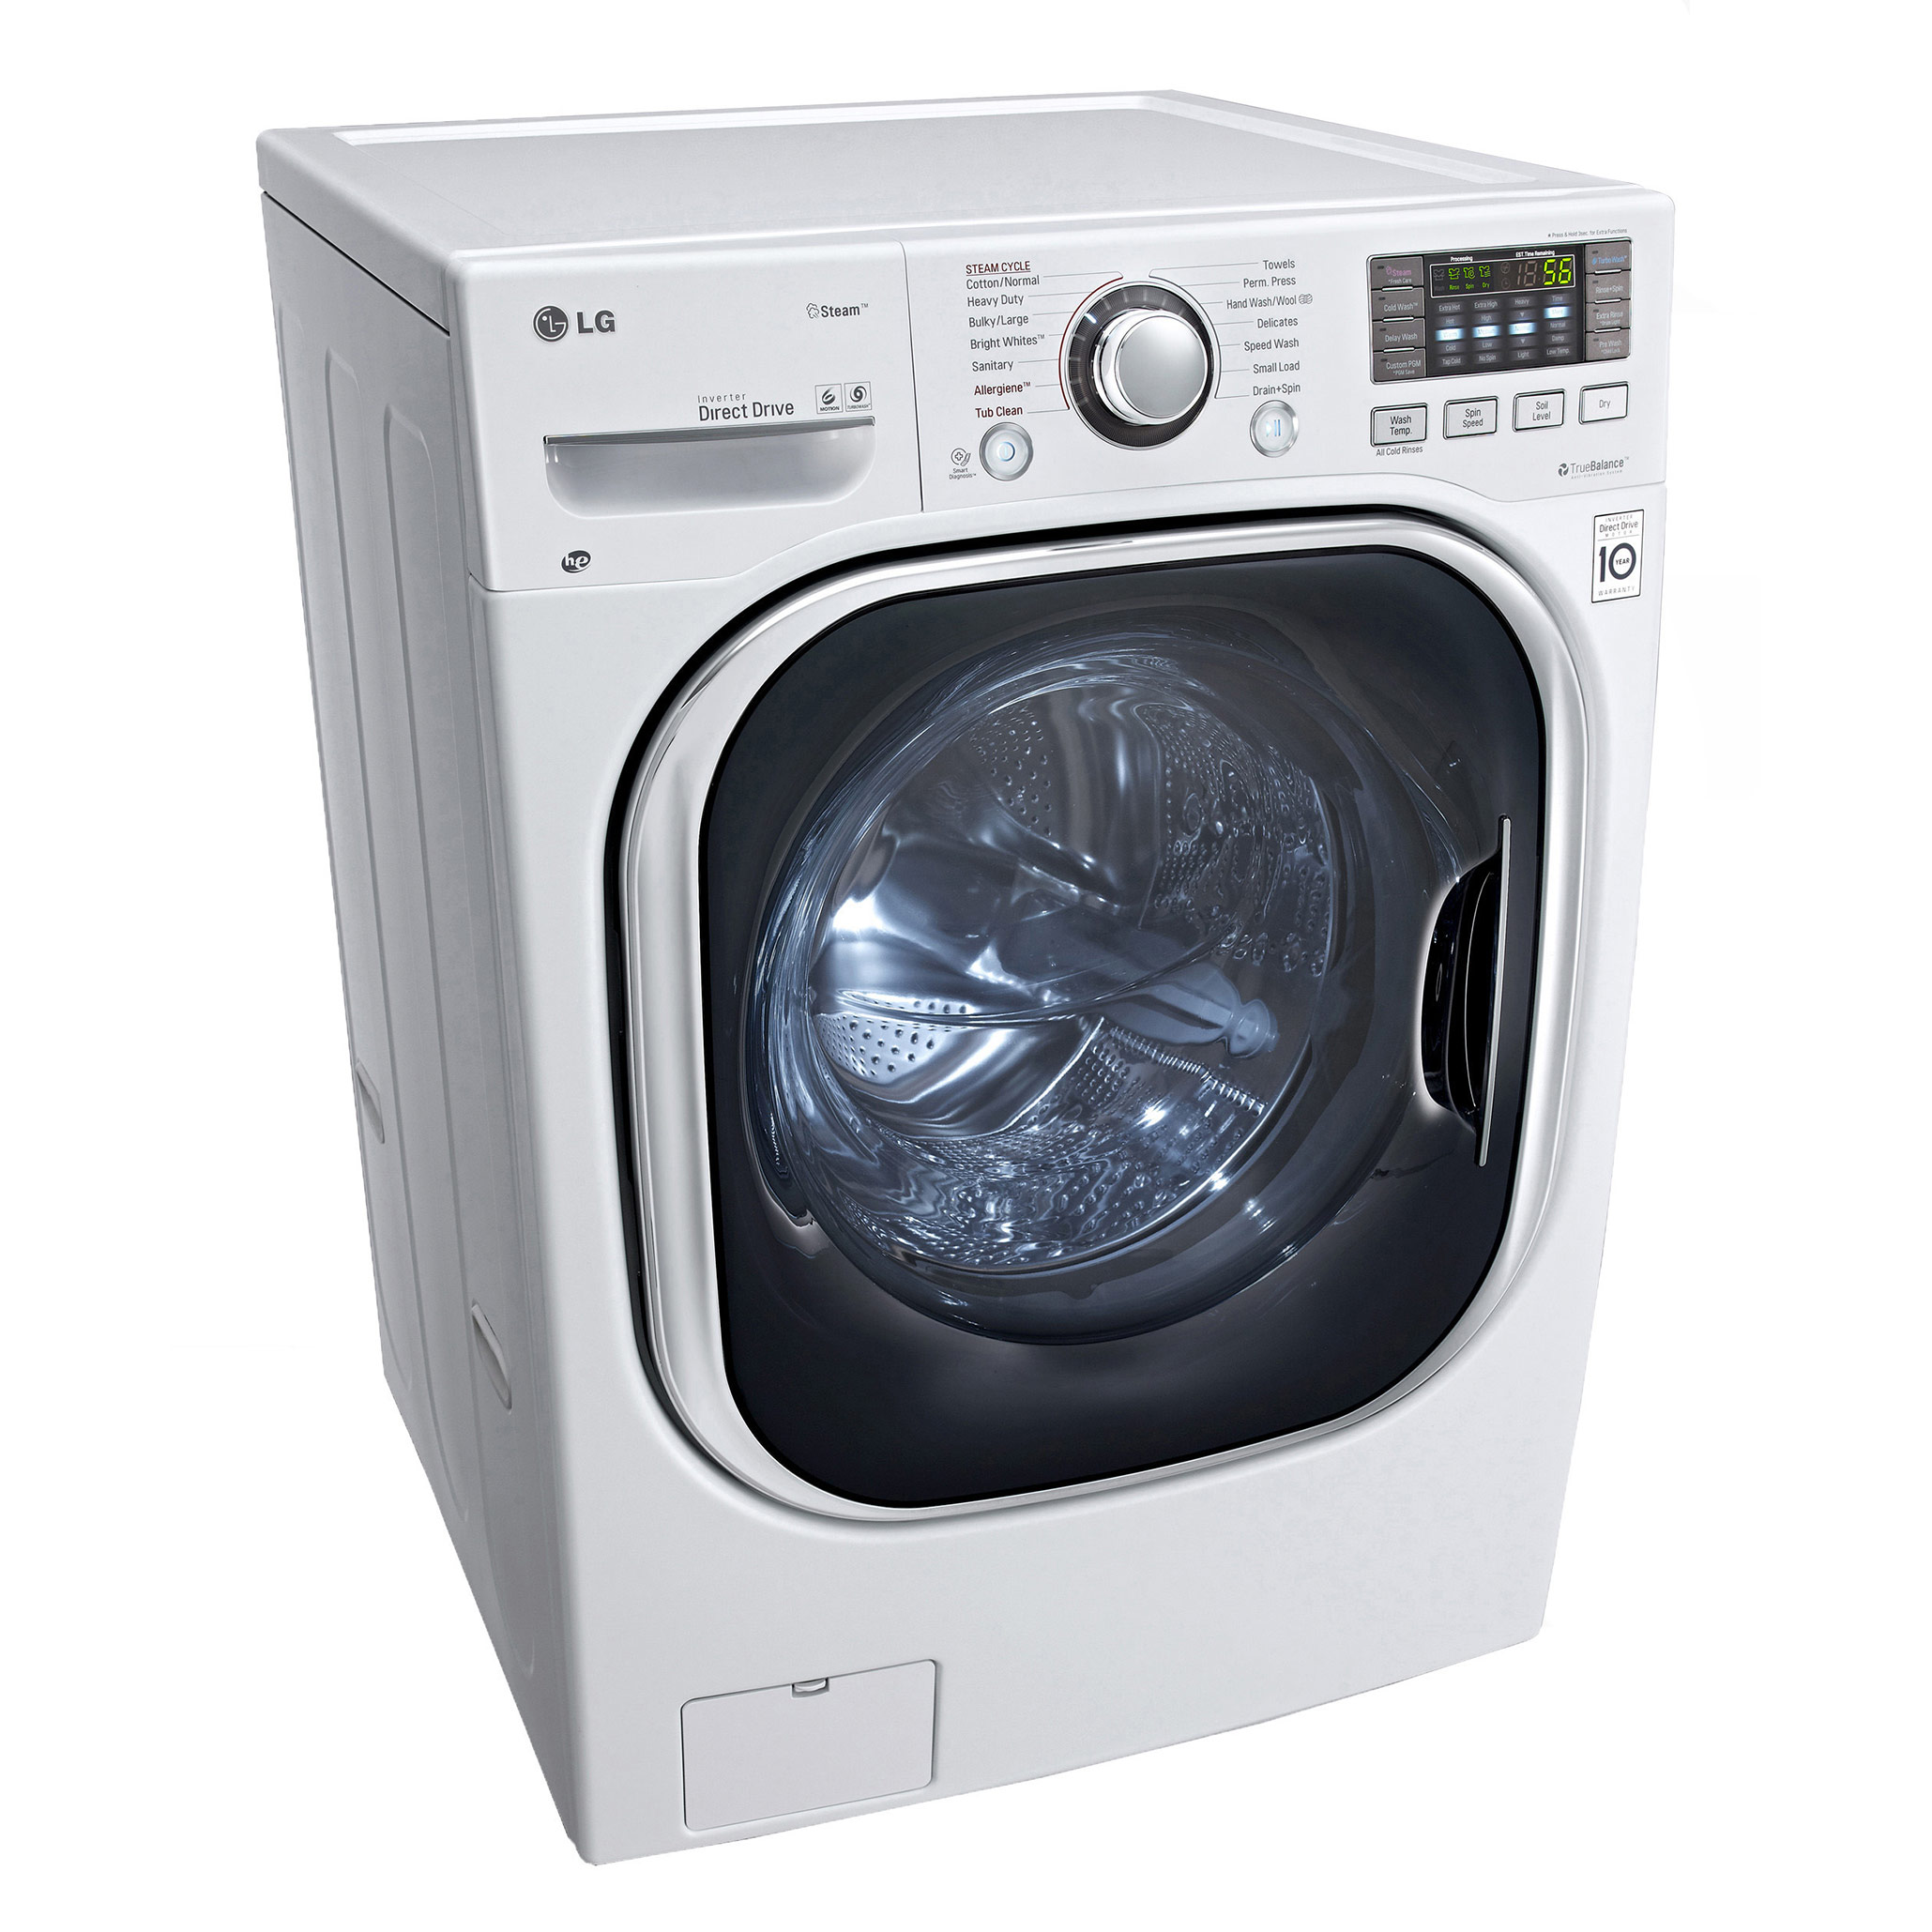 LG WM3997HWA | All in One Washer Dryer Combo | LGWasherDryer.com Lg All In One Washer Dryer Reviews